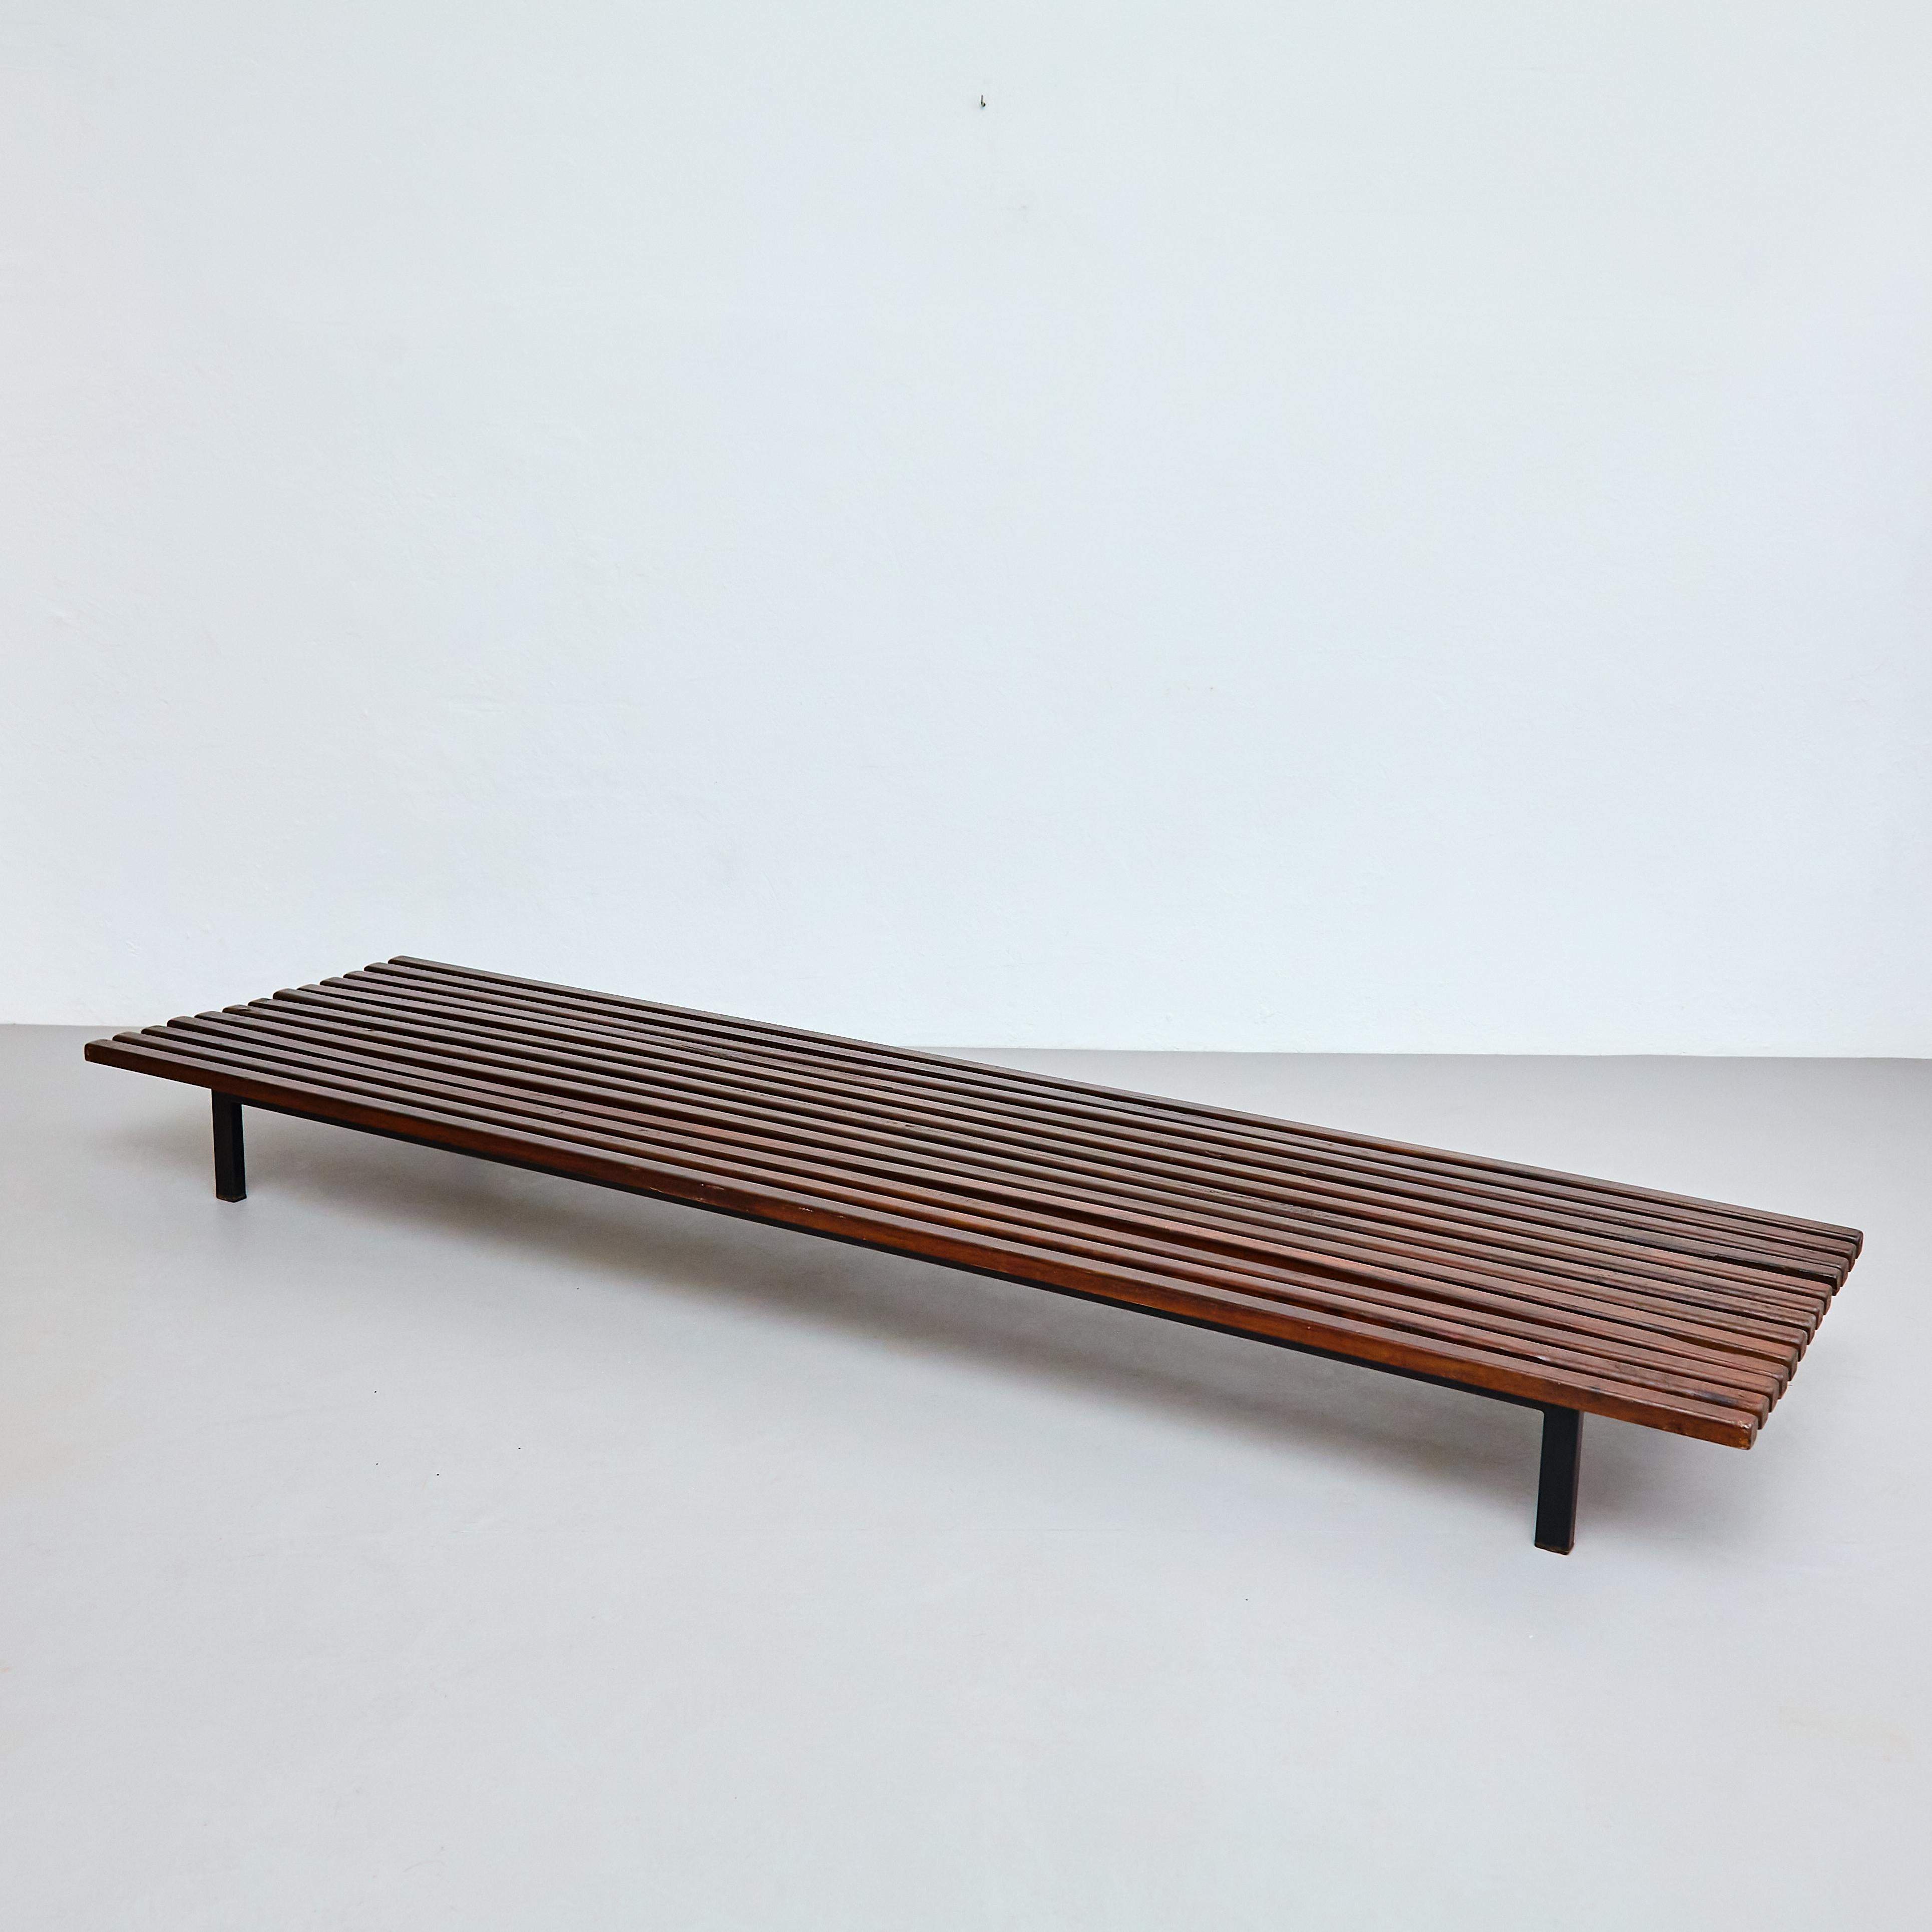 French Charlotte Perriand Mid-Century Modern Cansado Bench, circa 1950 For Sale